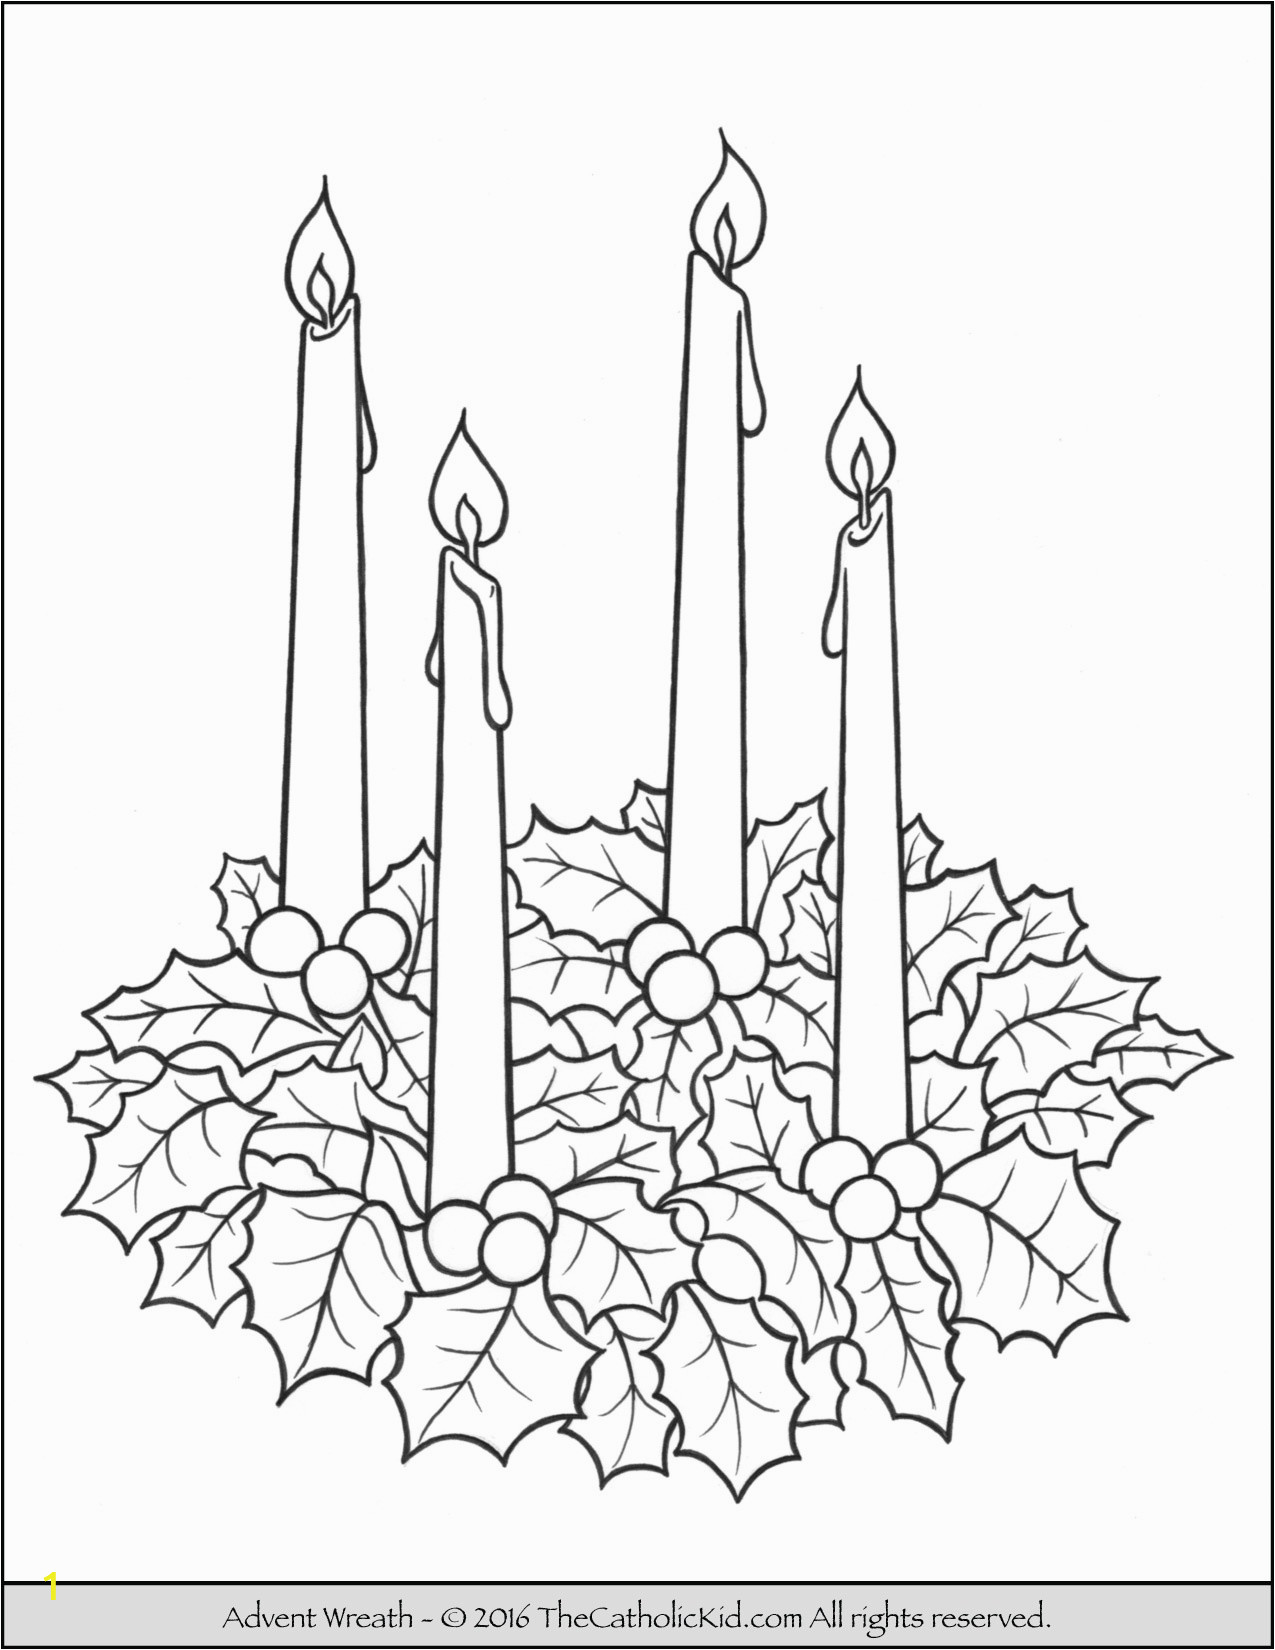 Free Printable Advent Wreath Coloring Pages Advent Candles Coloring Page